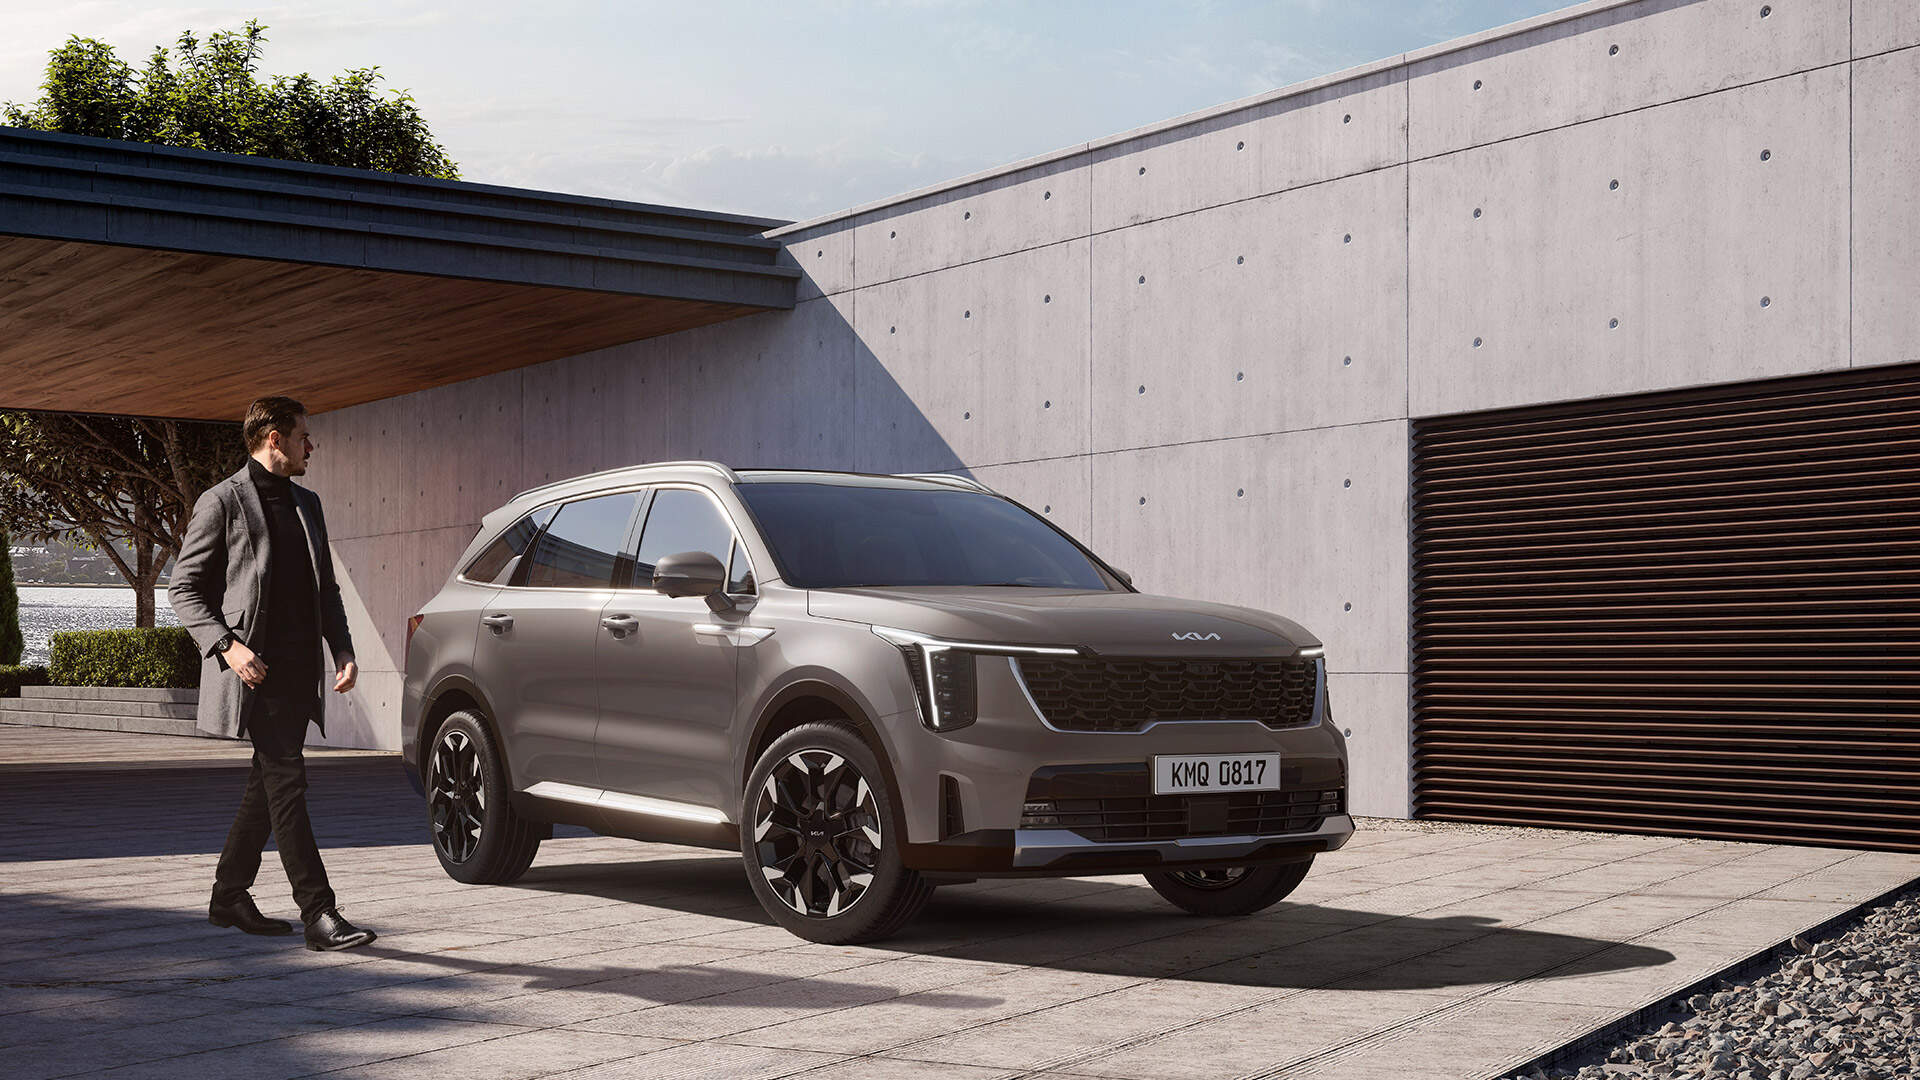 Stroll alongside the Kia Sorento, poised in front of a striking backdrop, embodying sophistication and urban charm